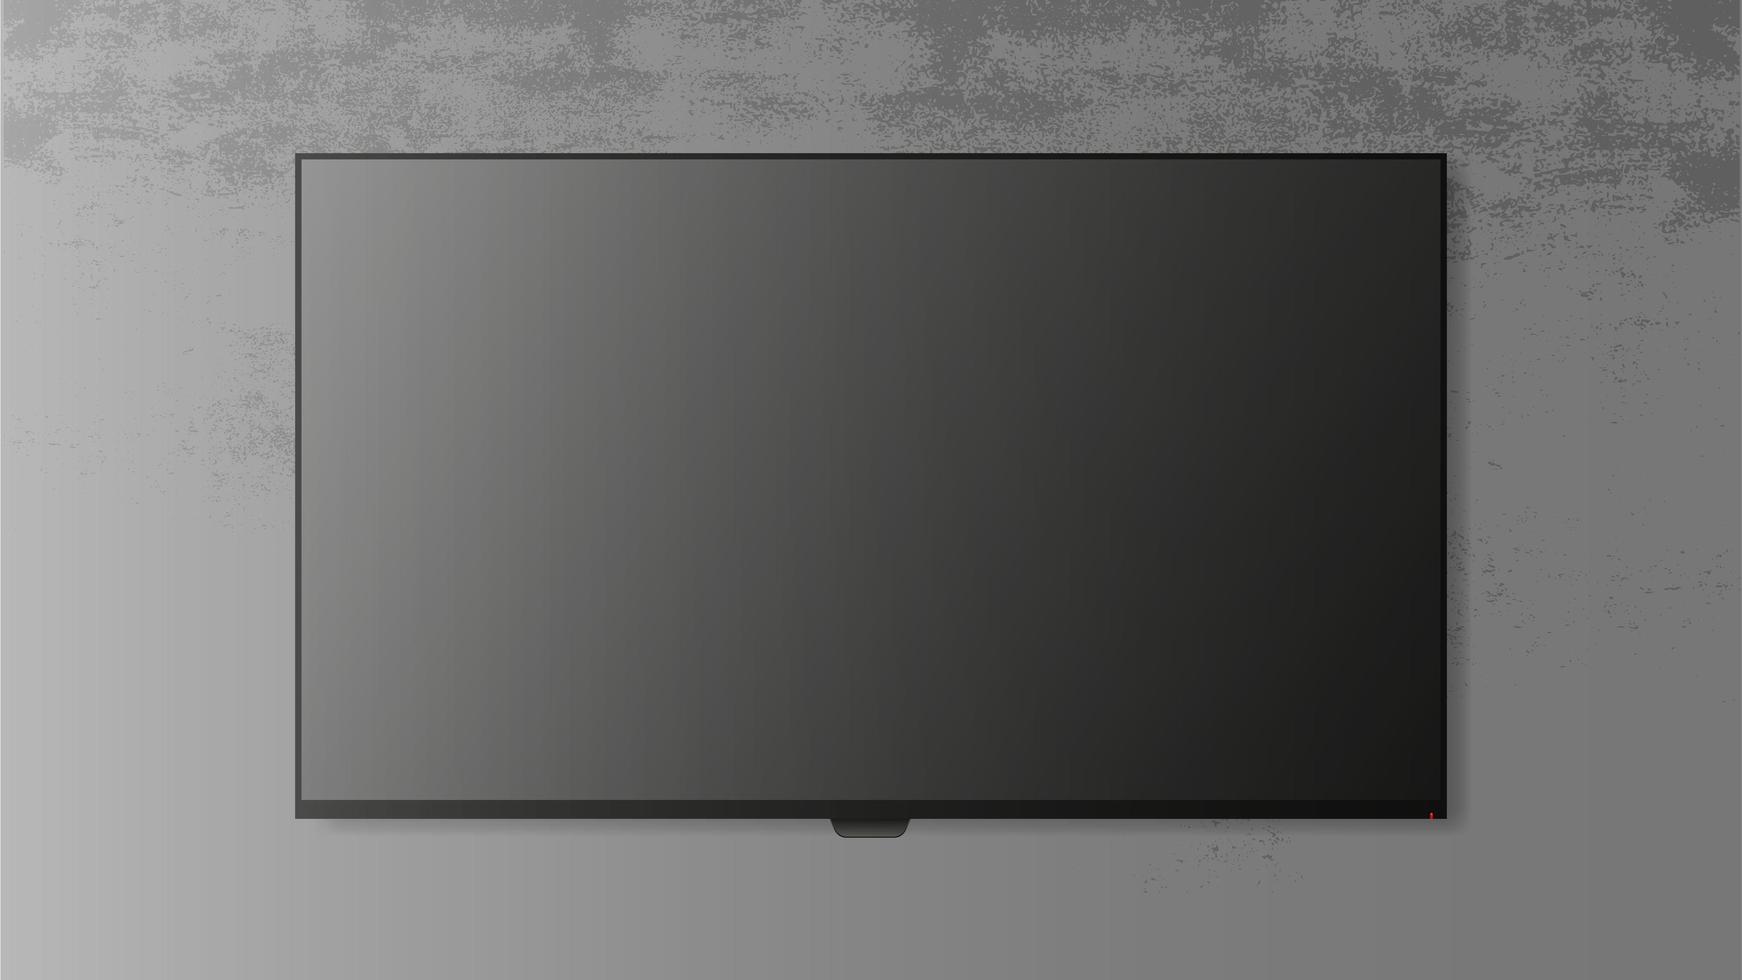 TV on a gray concrete wall. Realistic vector illustration.